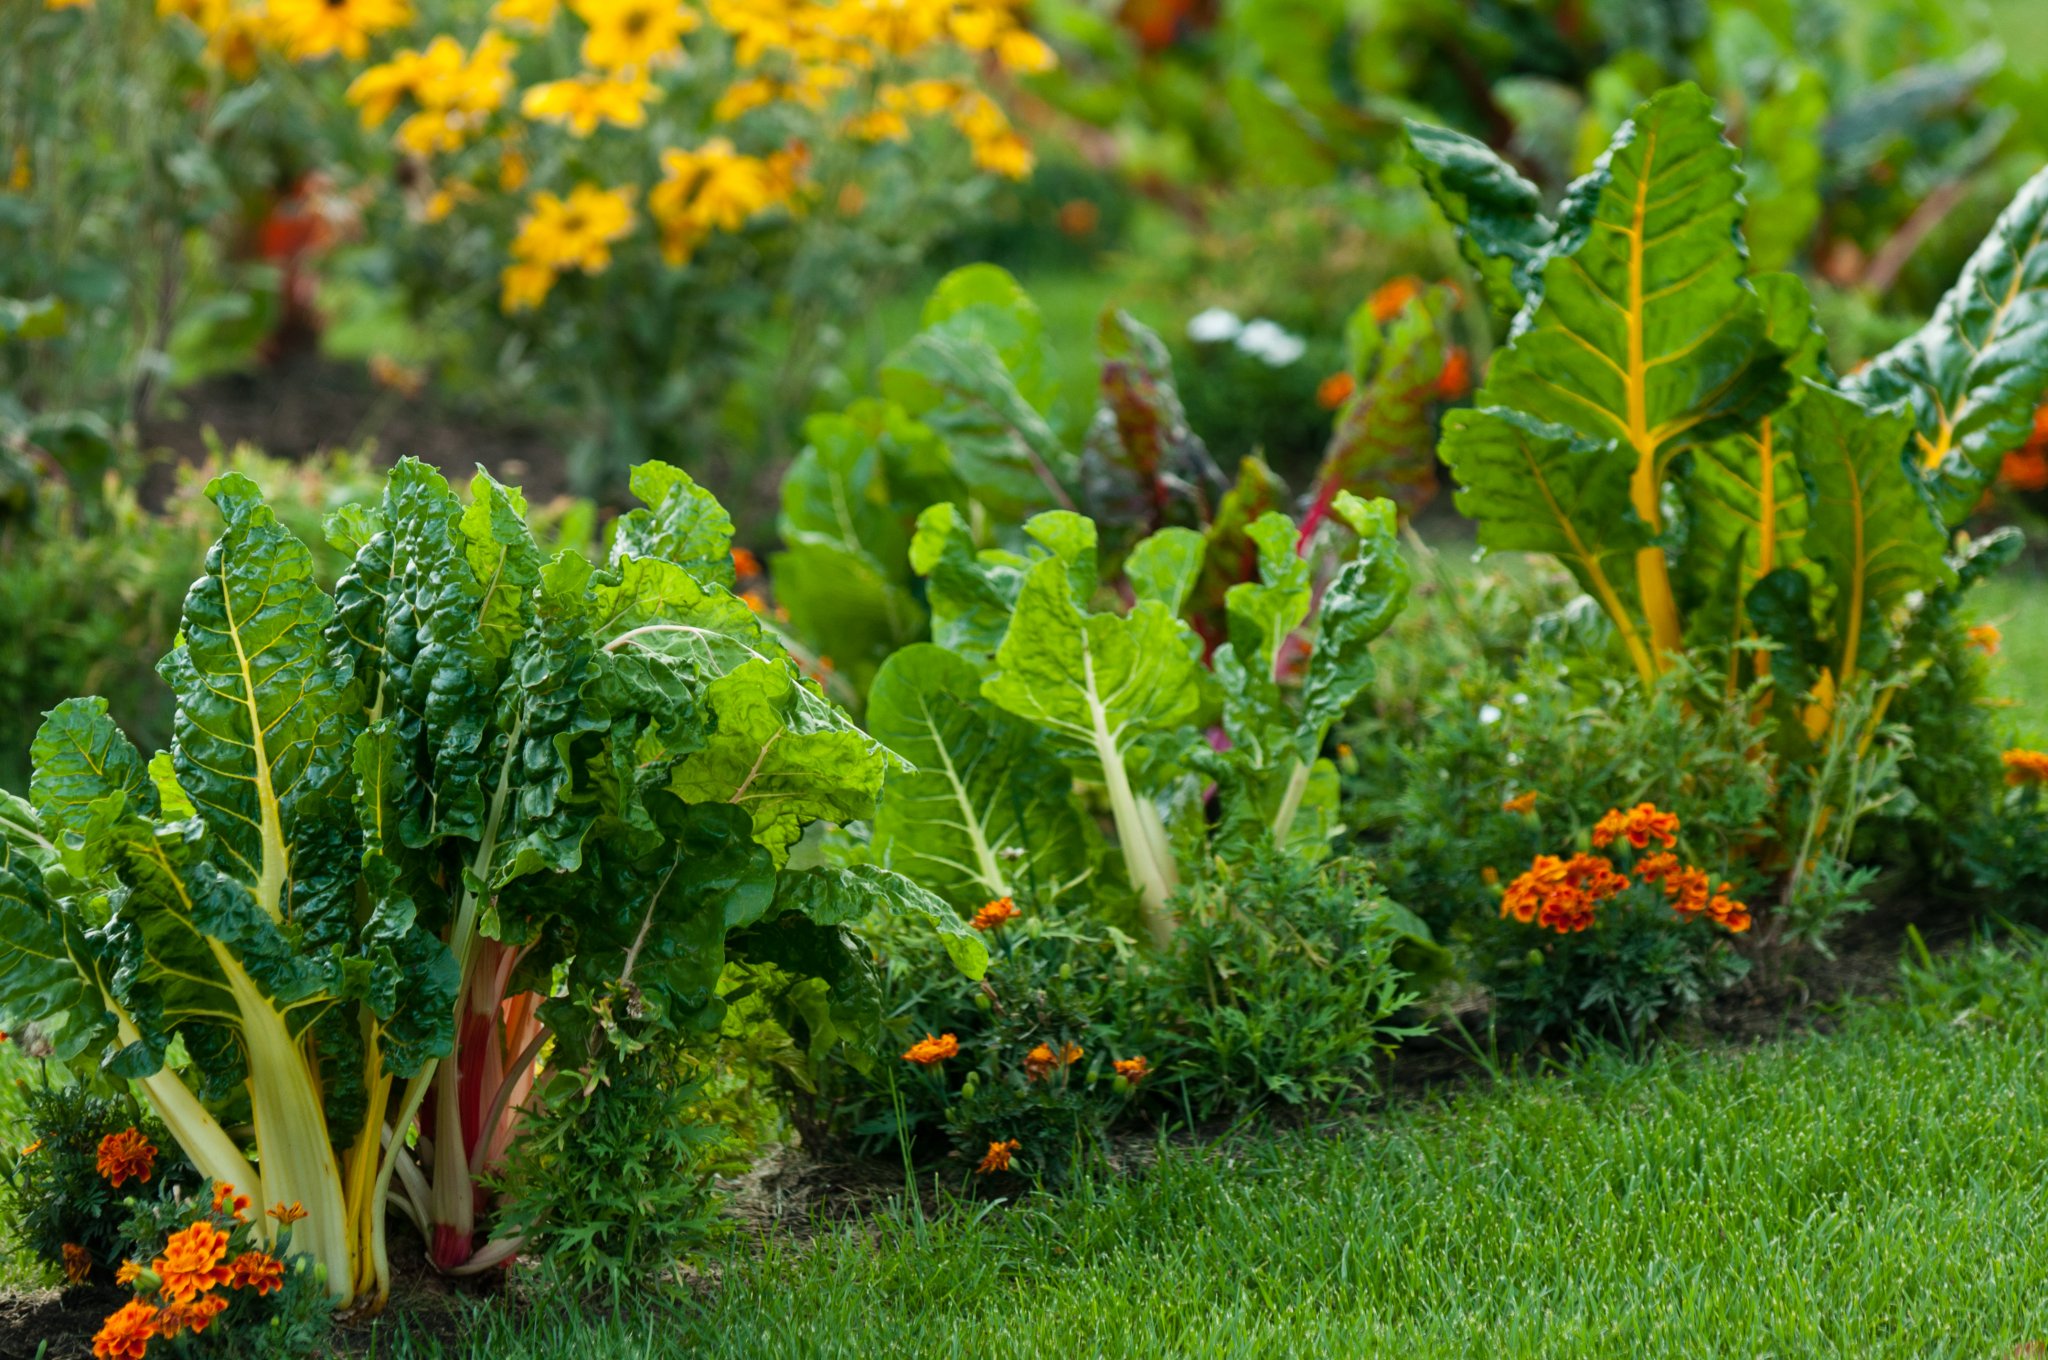 The Easiest Vegetables to Grow in New England - Food Gardening Network